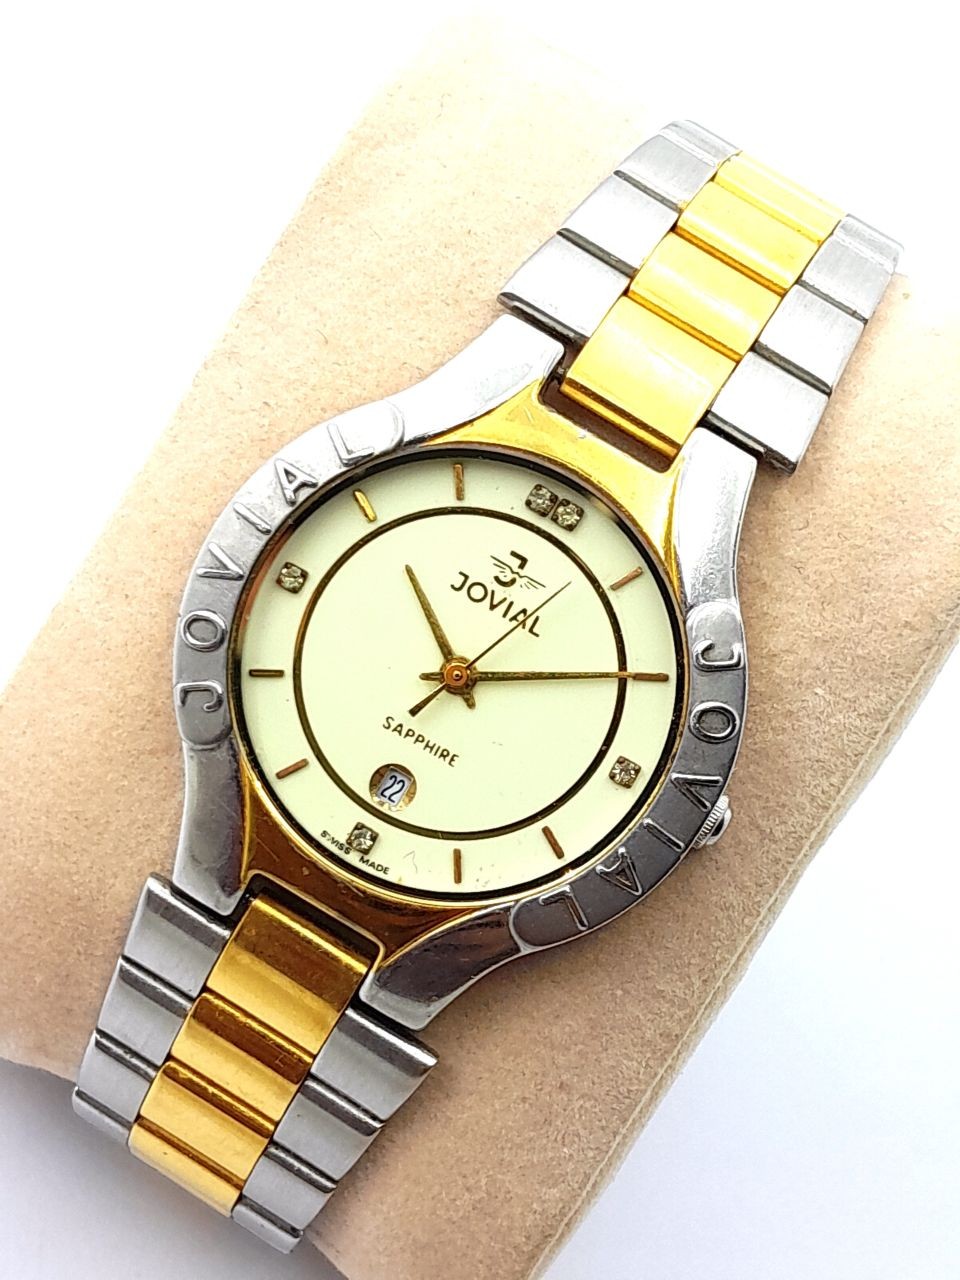 Jovial gold plated watch